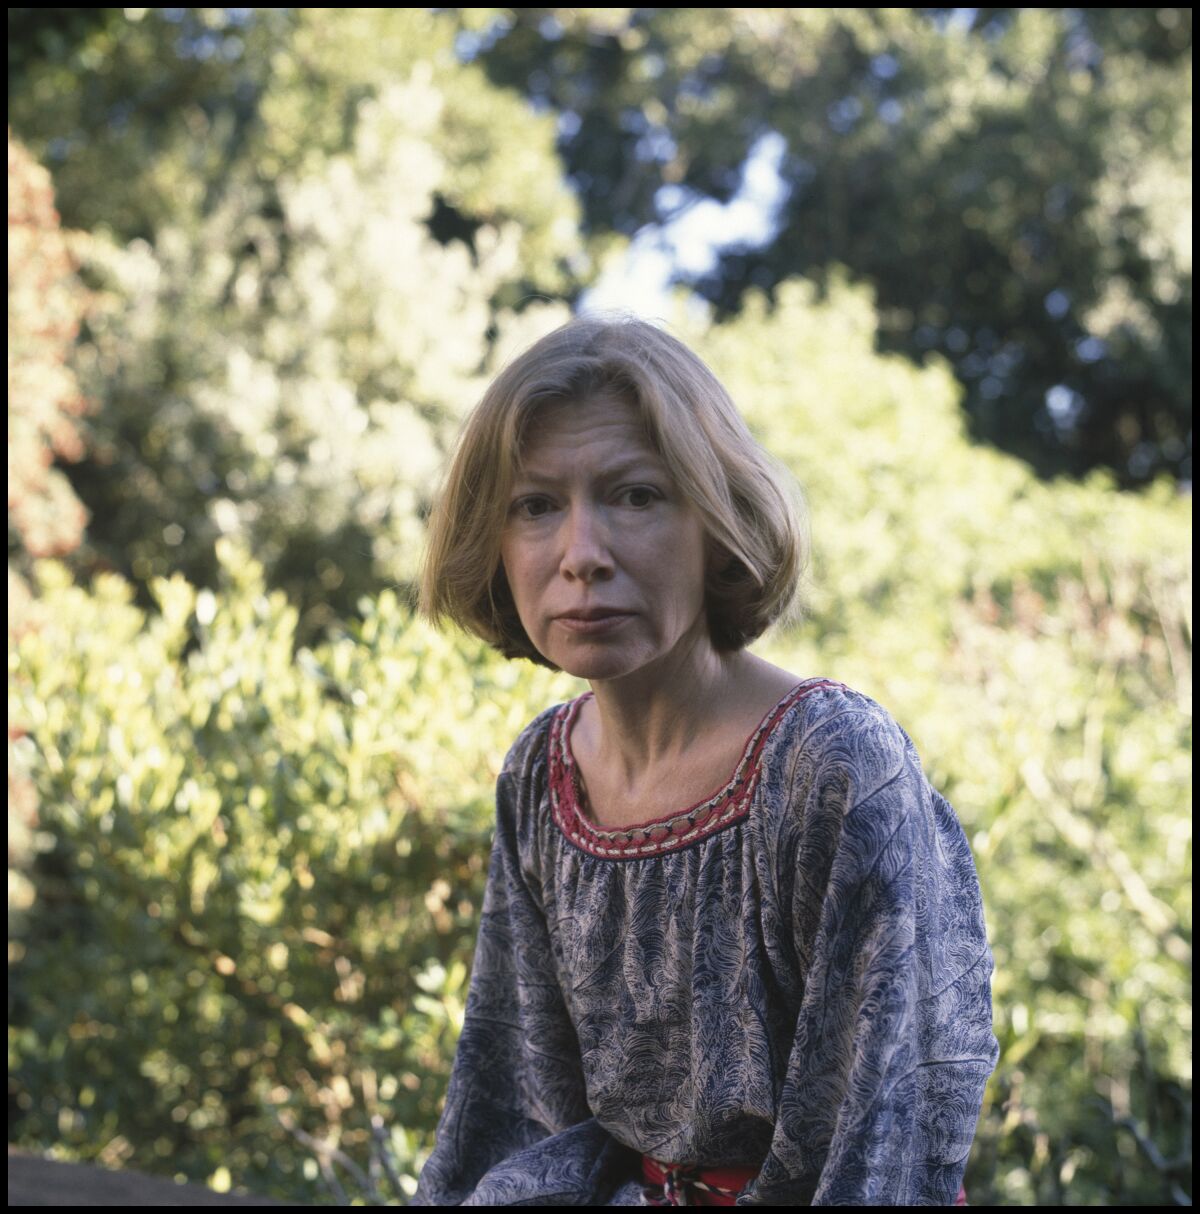 Joan Didion is seen seated in a garden in a loose floral blouse.